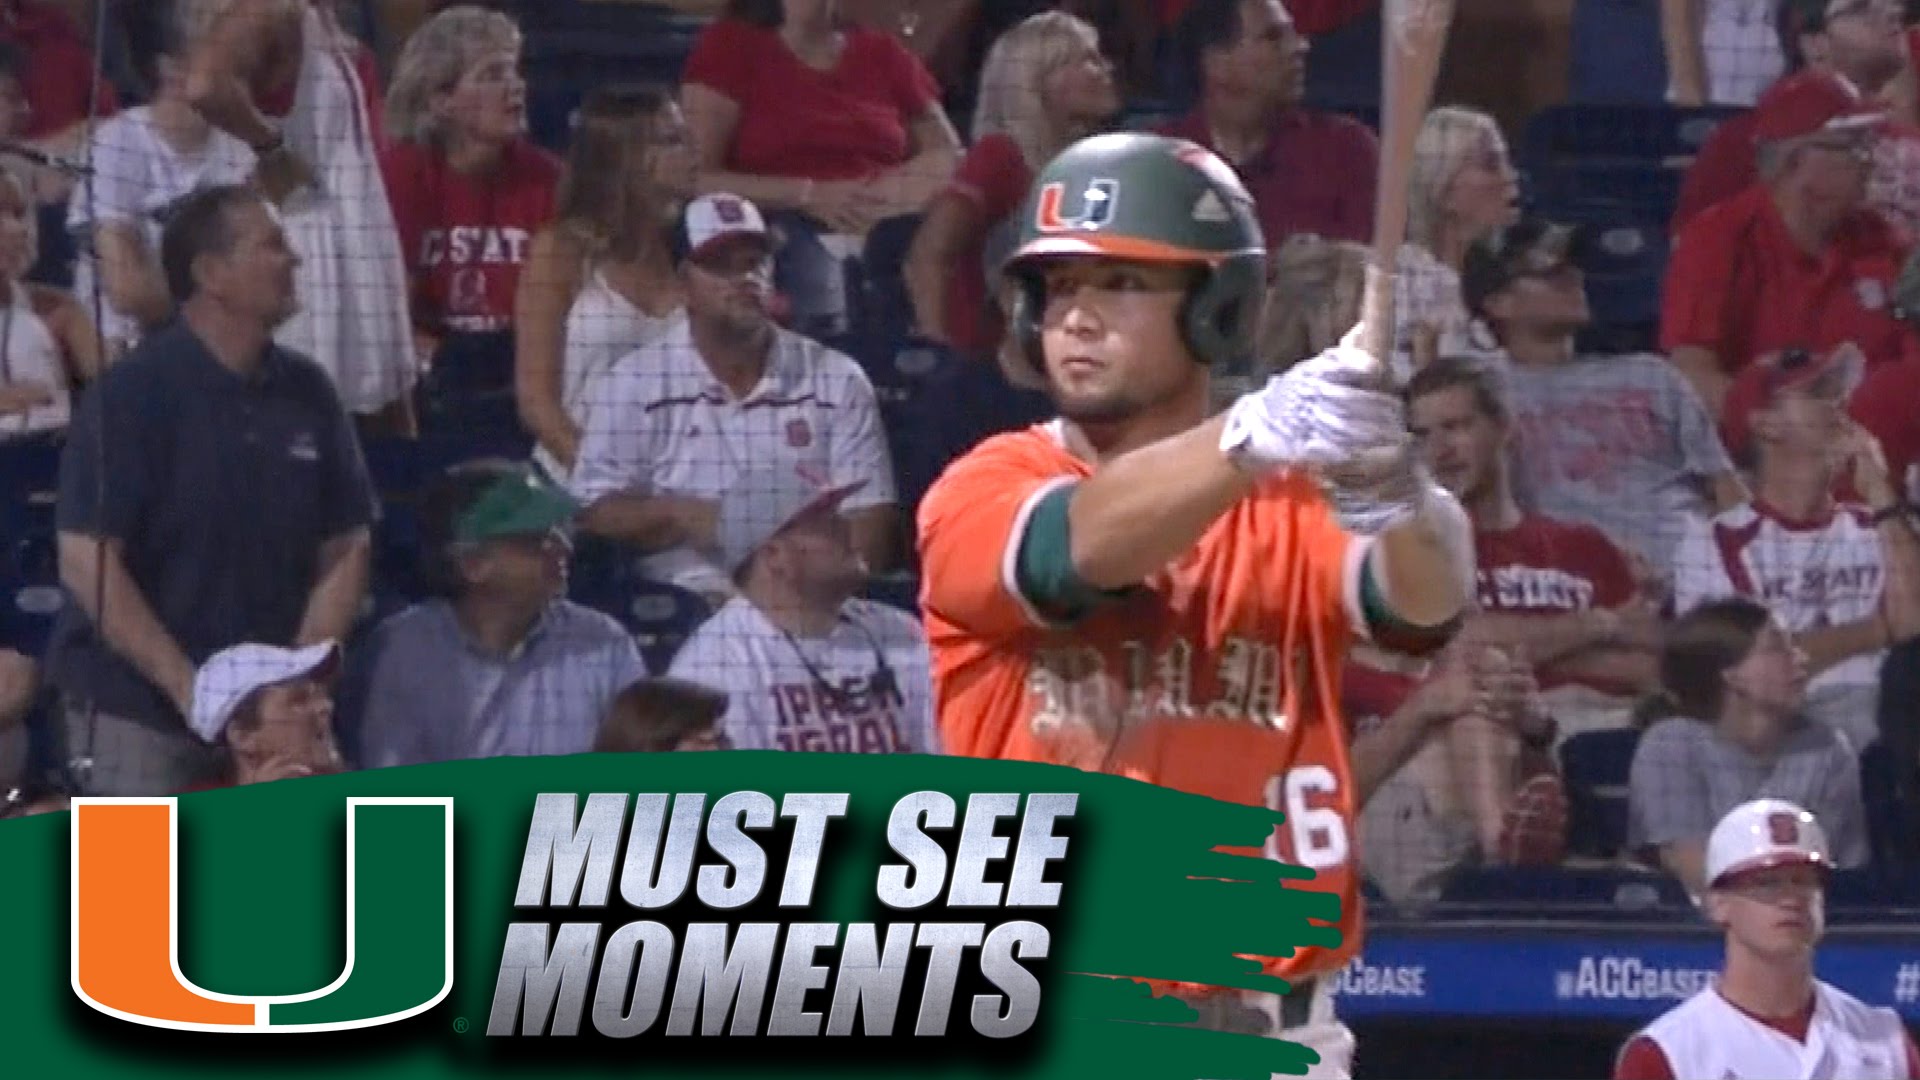 Miami Hurricanes player pimps the hell out of his game winning homer